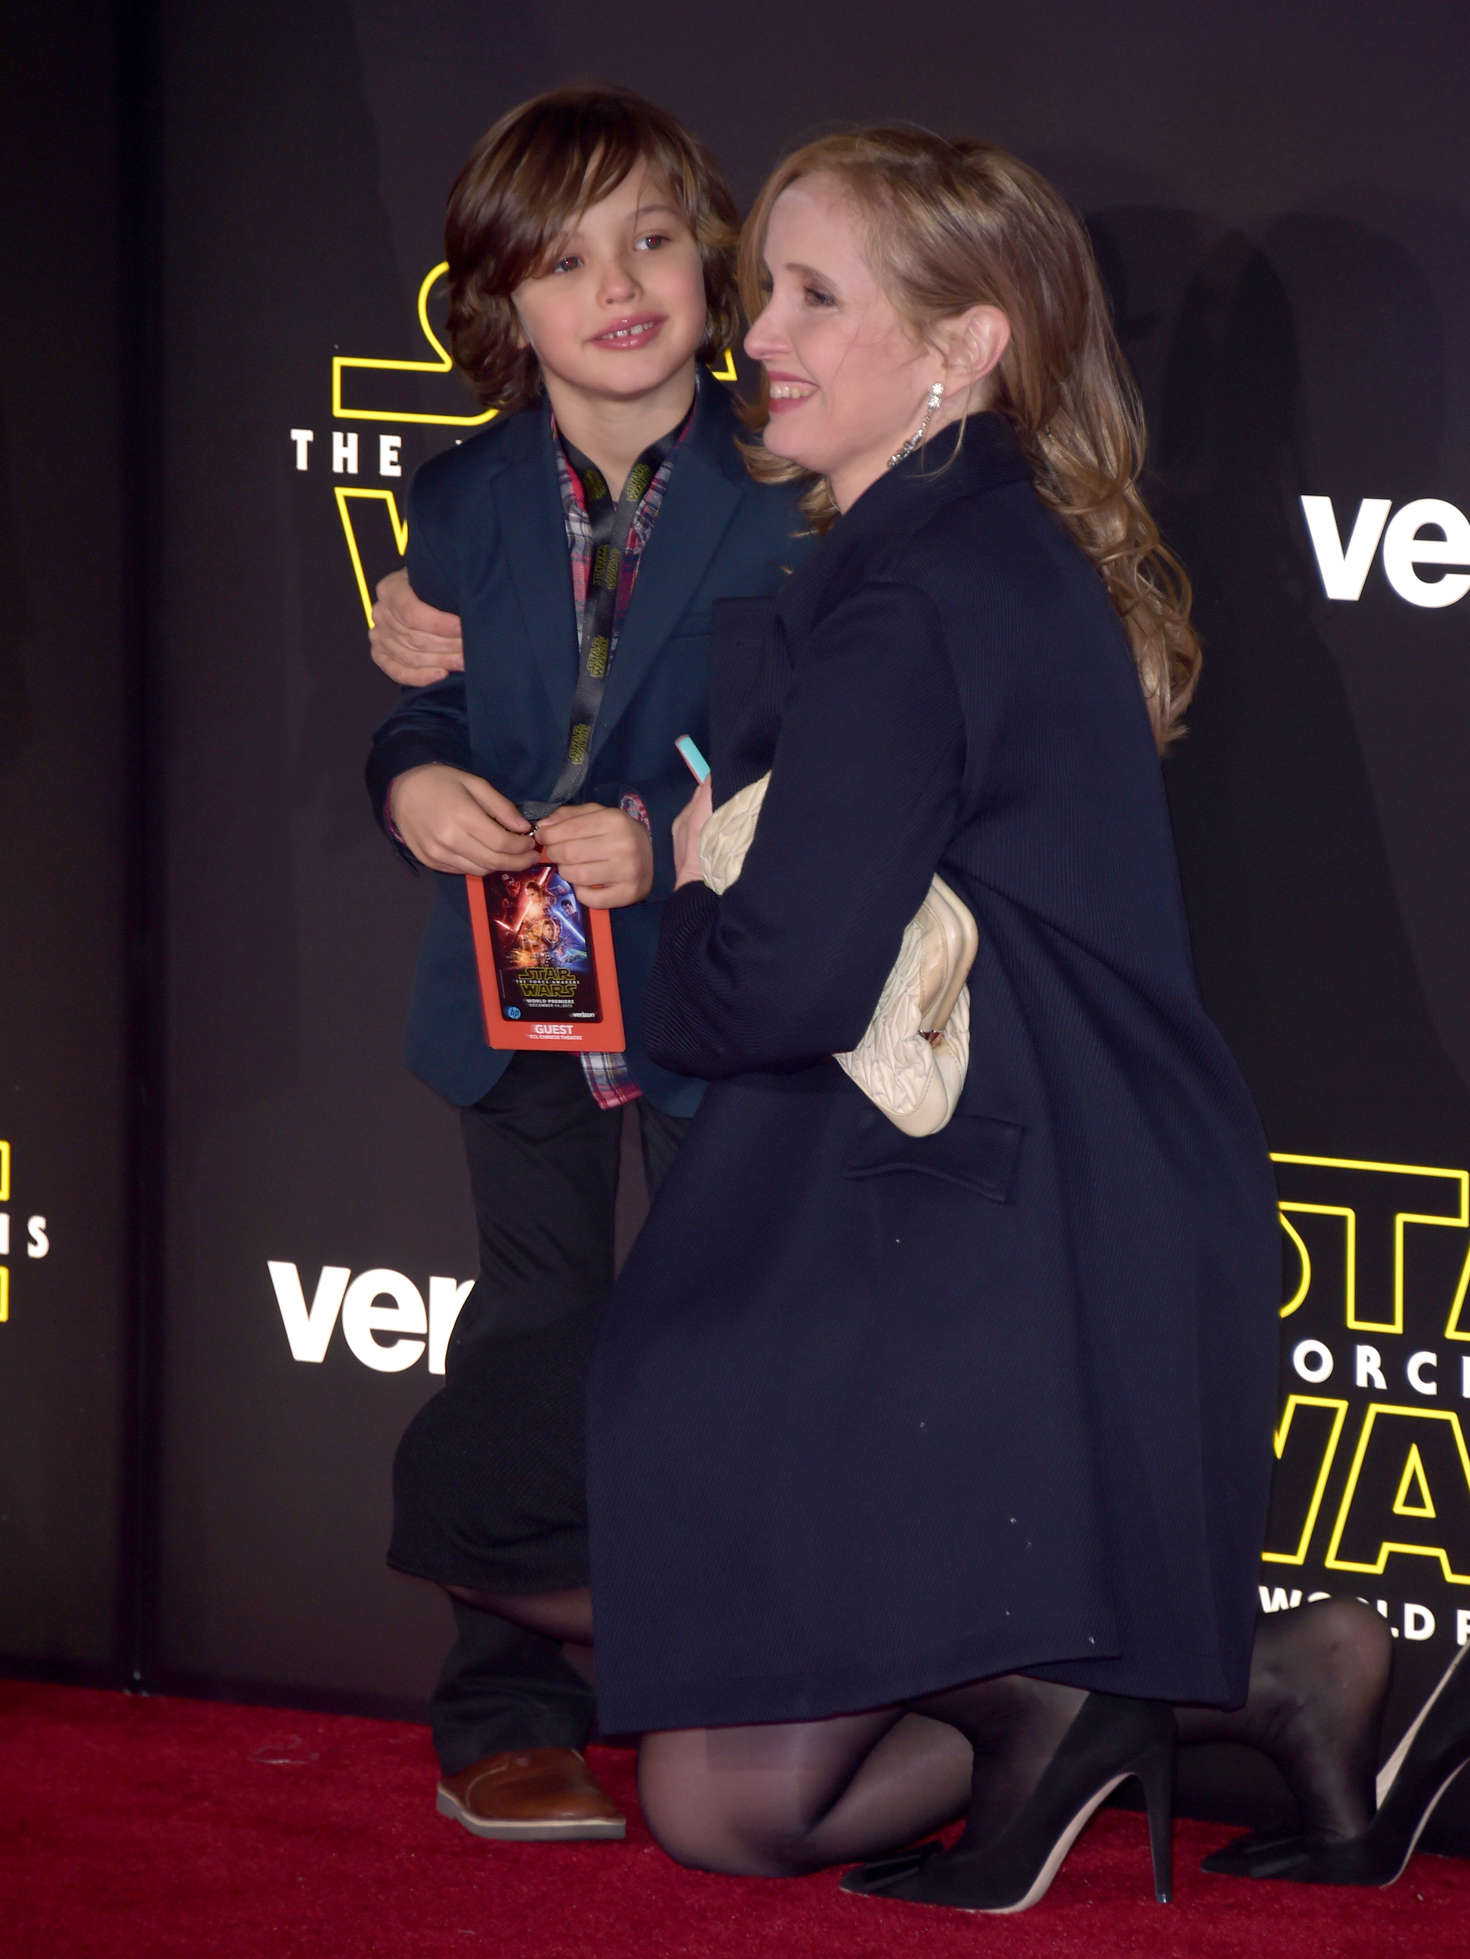 Julie Delpy Star Wars The Force Awakens Premiere in Hollywood-1